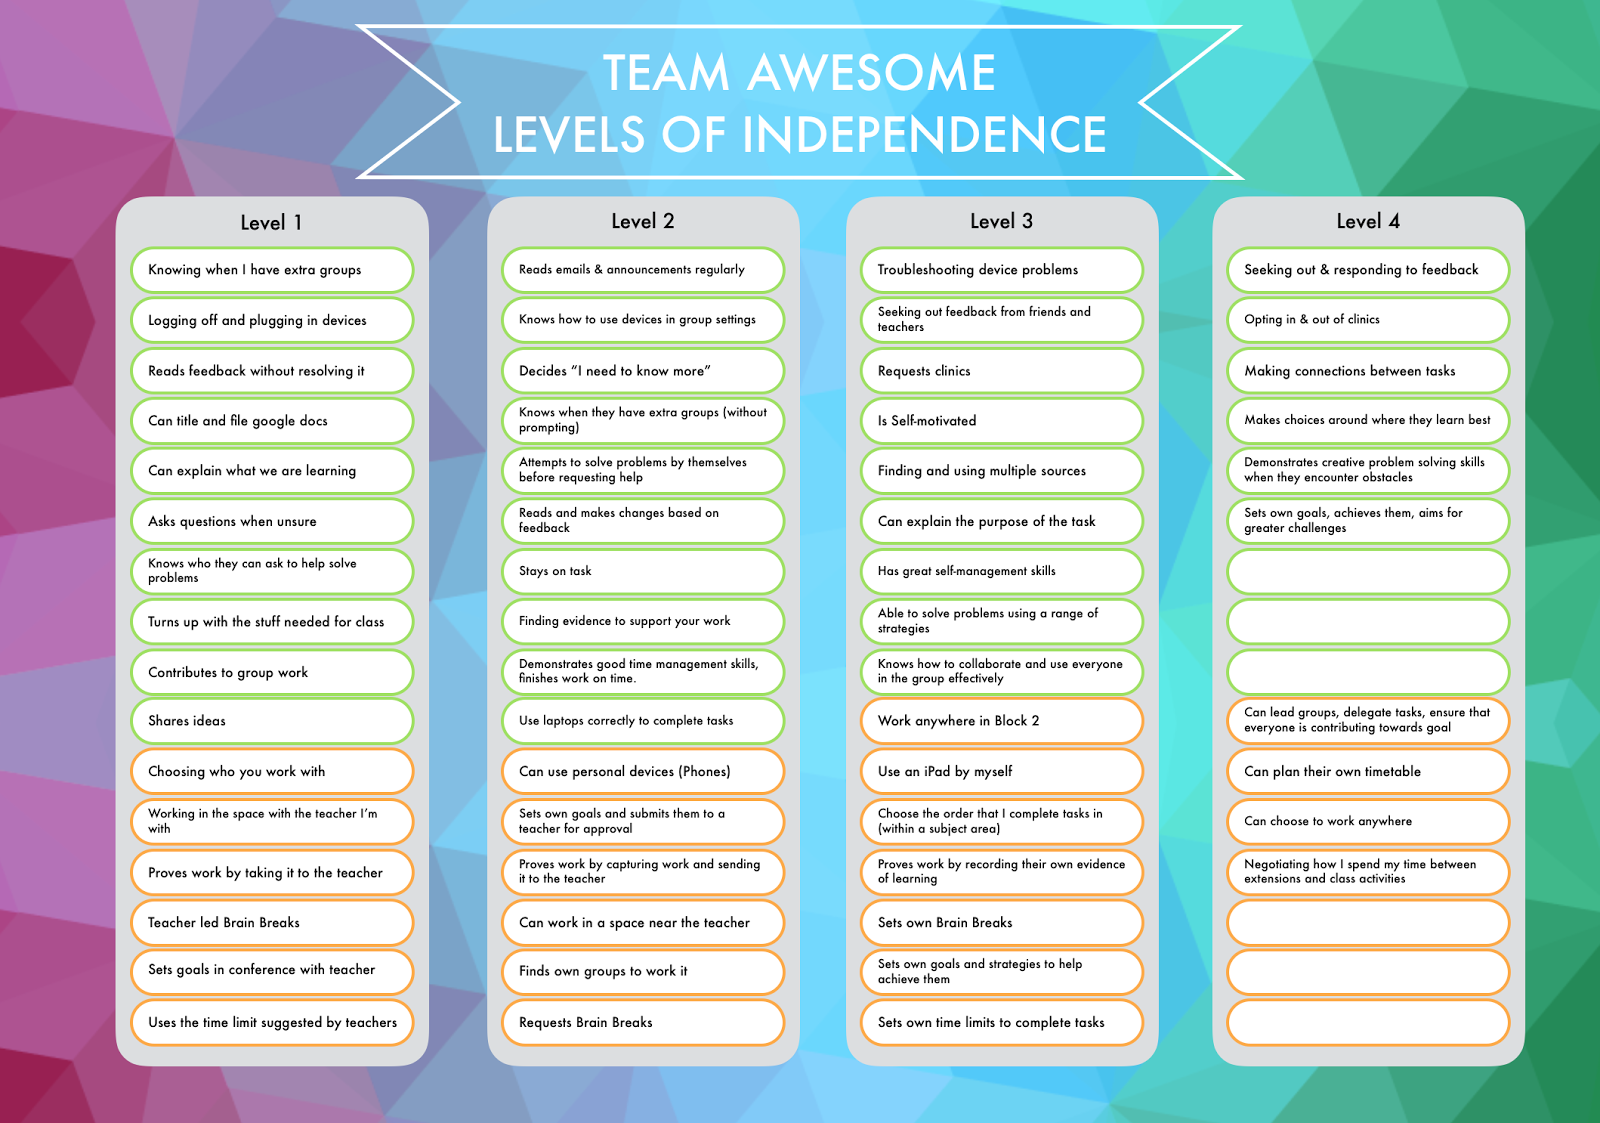 Team Awesome's Levels of Independence